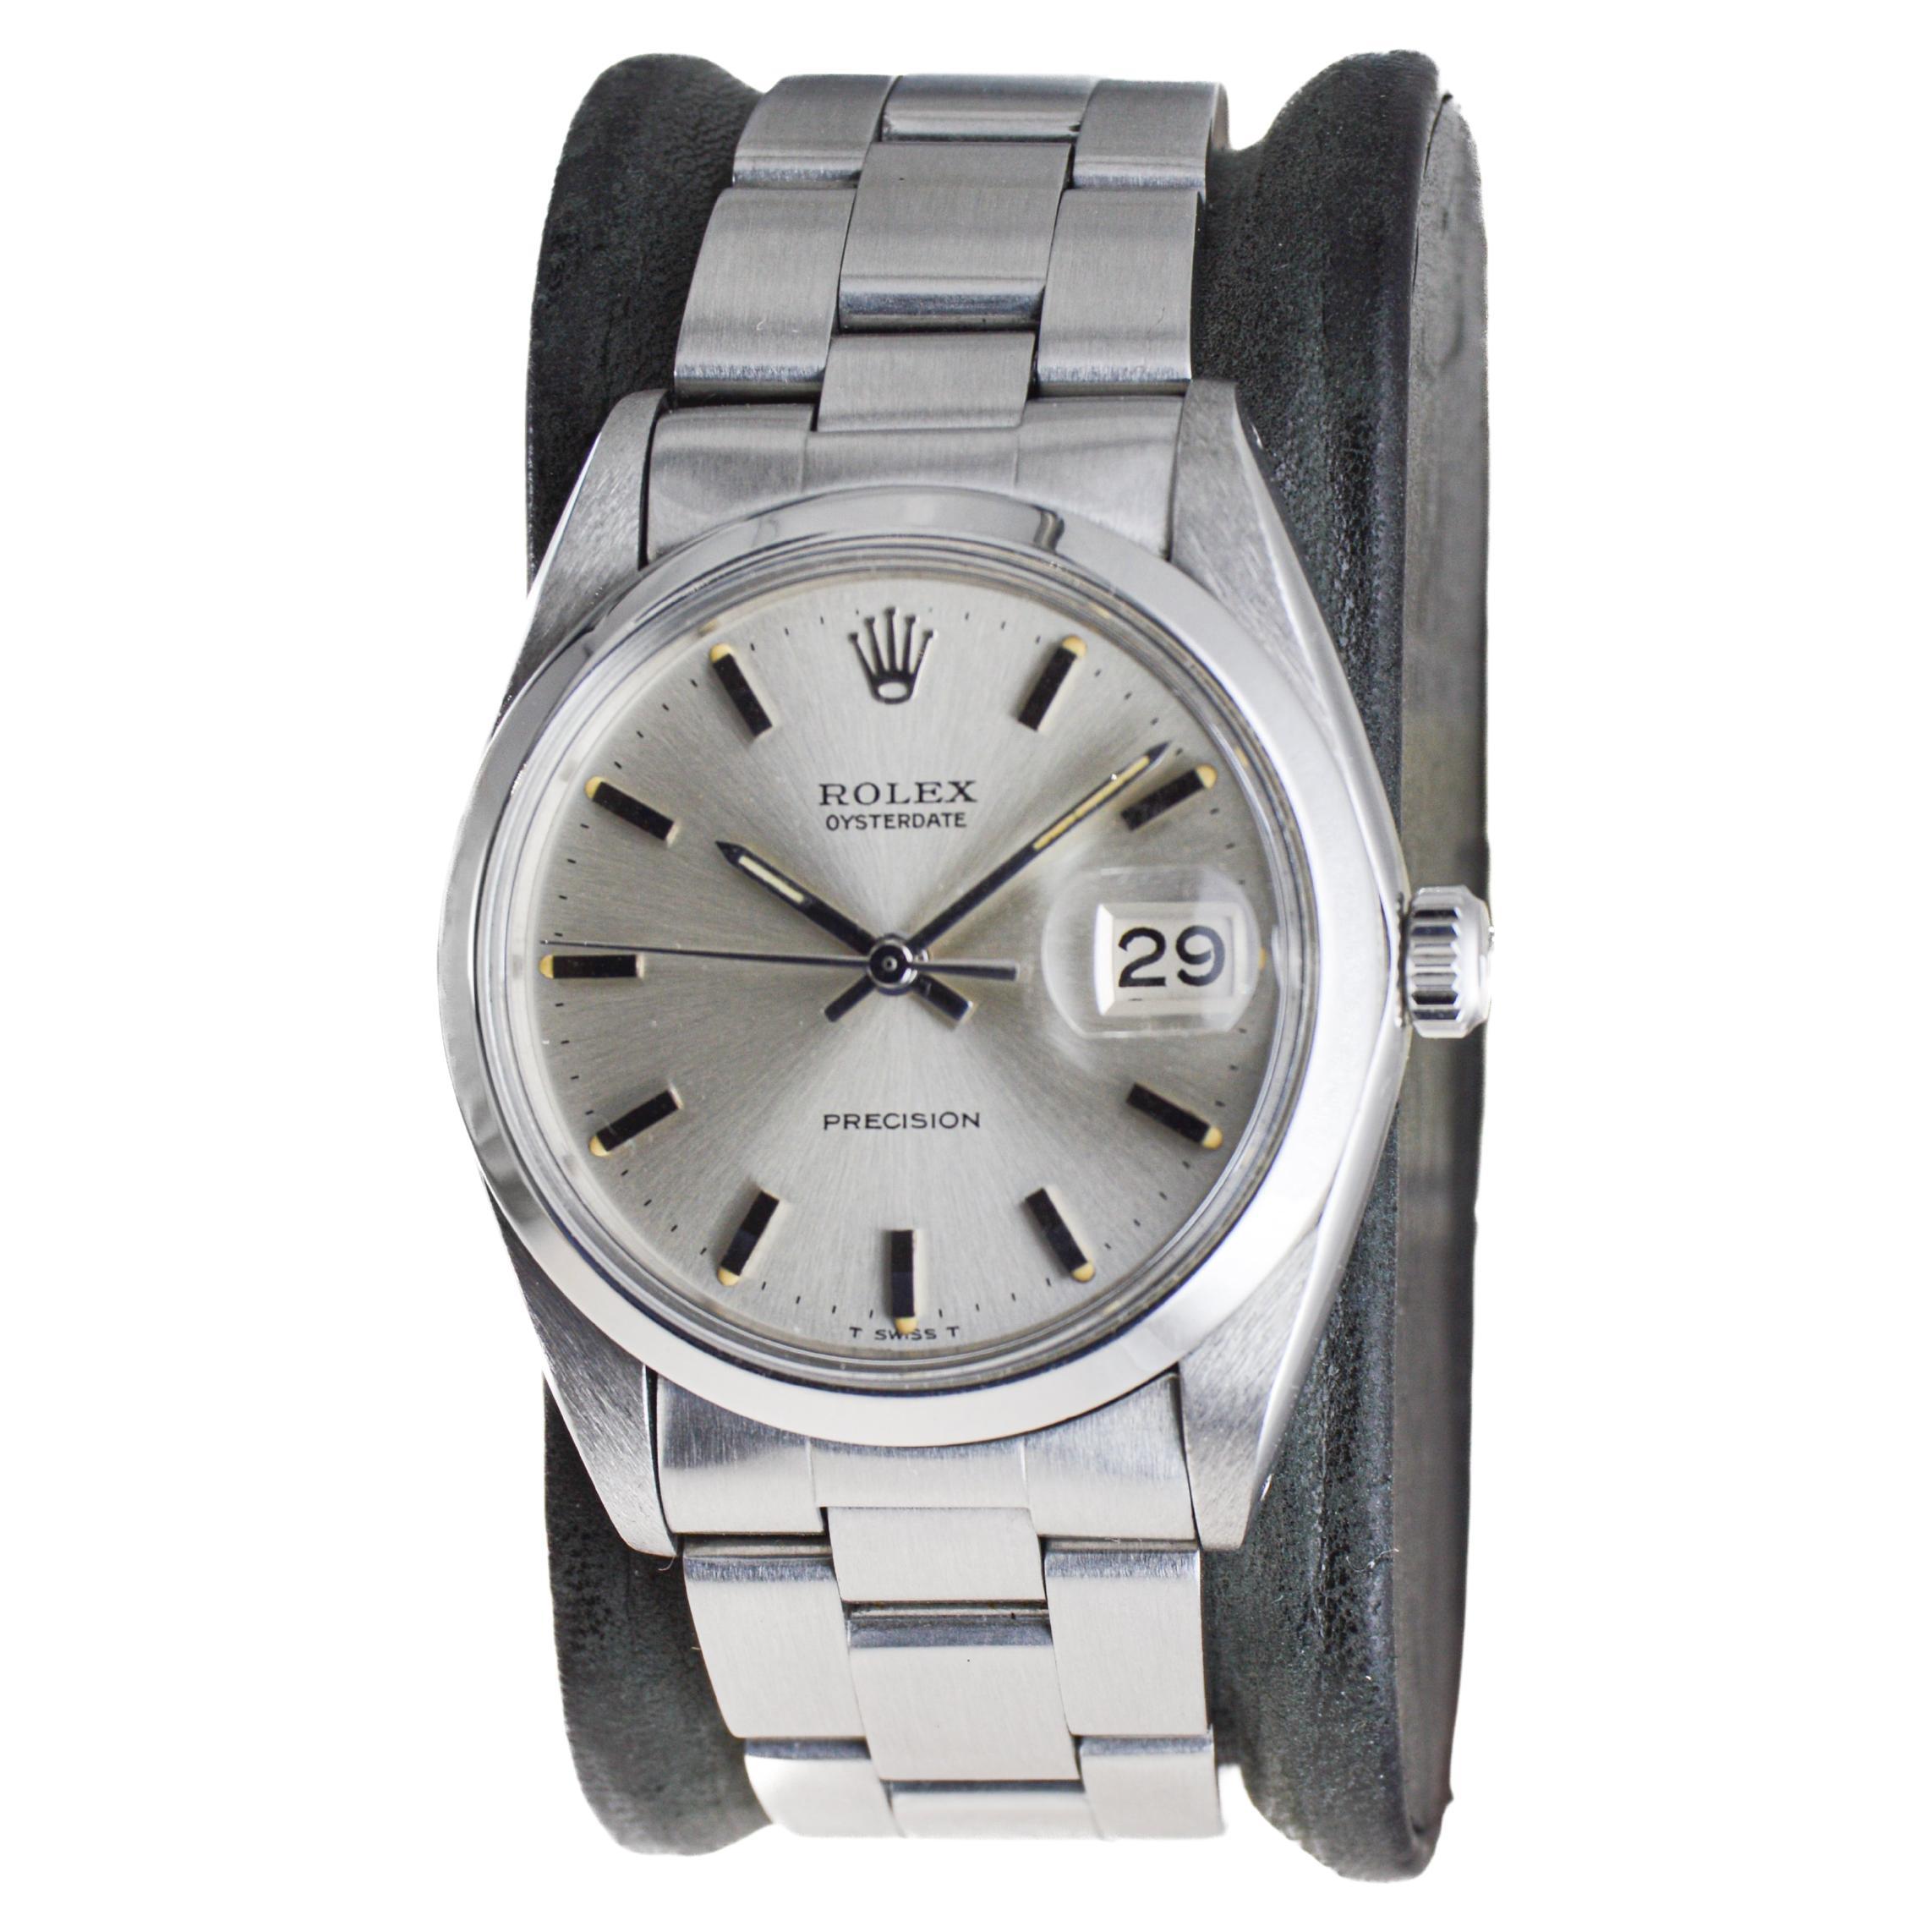 Rolex Stainless Steel Oysterdate with Factory Original Silver Dial circa, 1967 In Excellent Condition For Sale In Long Beach, CA